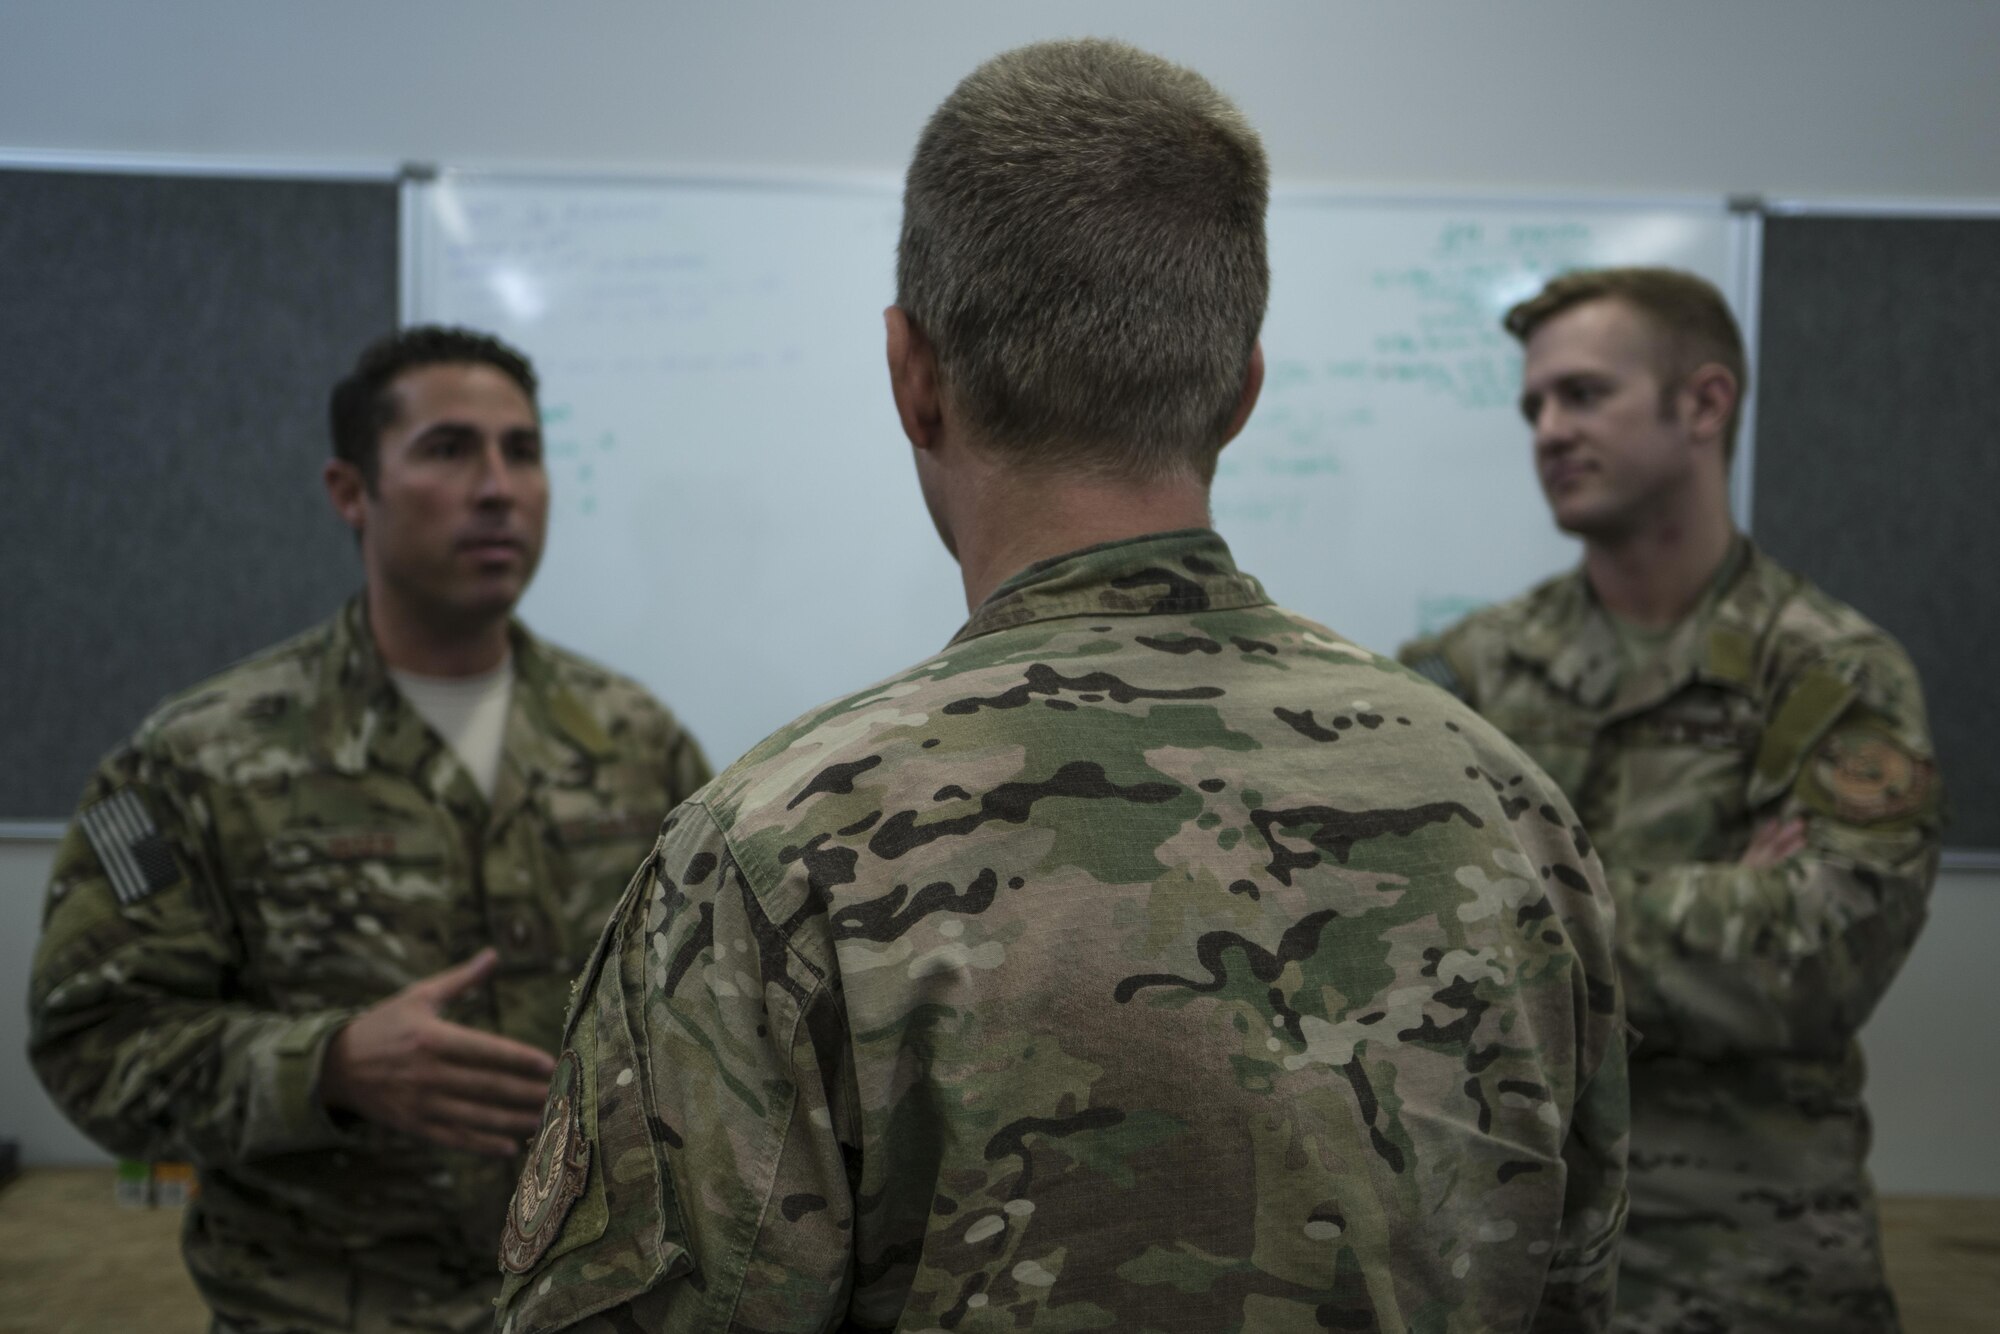 A U.S. Air Force 320th Special Tactics Squadron combat controller and pararescueman ask their intelligence analysist questions about the warfighting scenario in preparation for special operations missions to be conducted during Talisman Saber 2017, July 9, 2017, at Rockhampton, Australia. Talisman Saber 2017 is a biennial military training exercise from 23 June to 25 July throughout various locations in Australia. (U.S. Air Force photo by Capt. Jessica Tait)